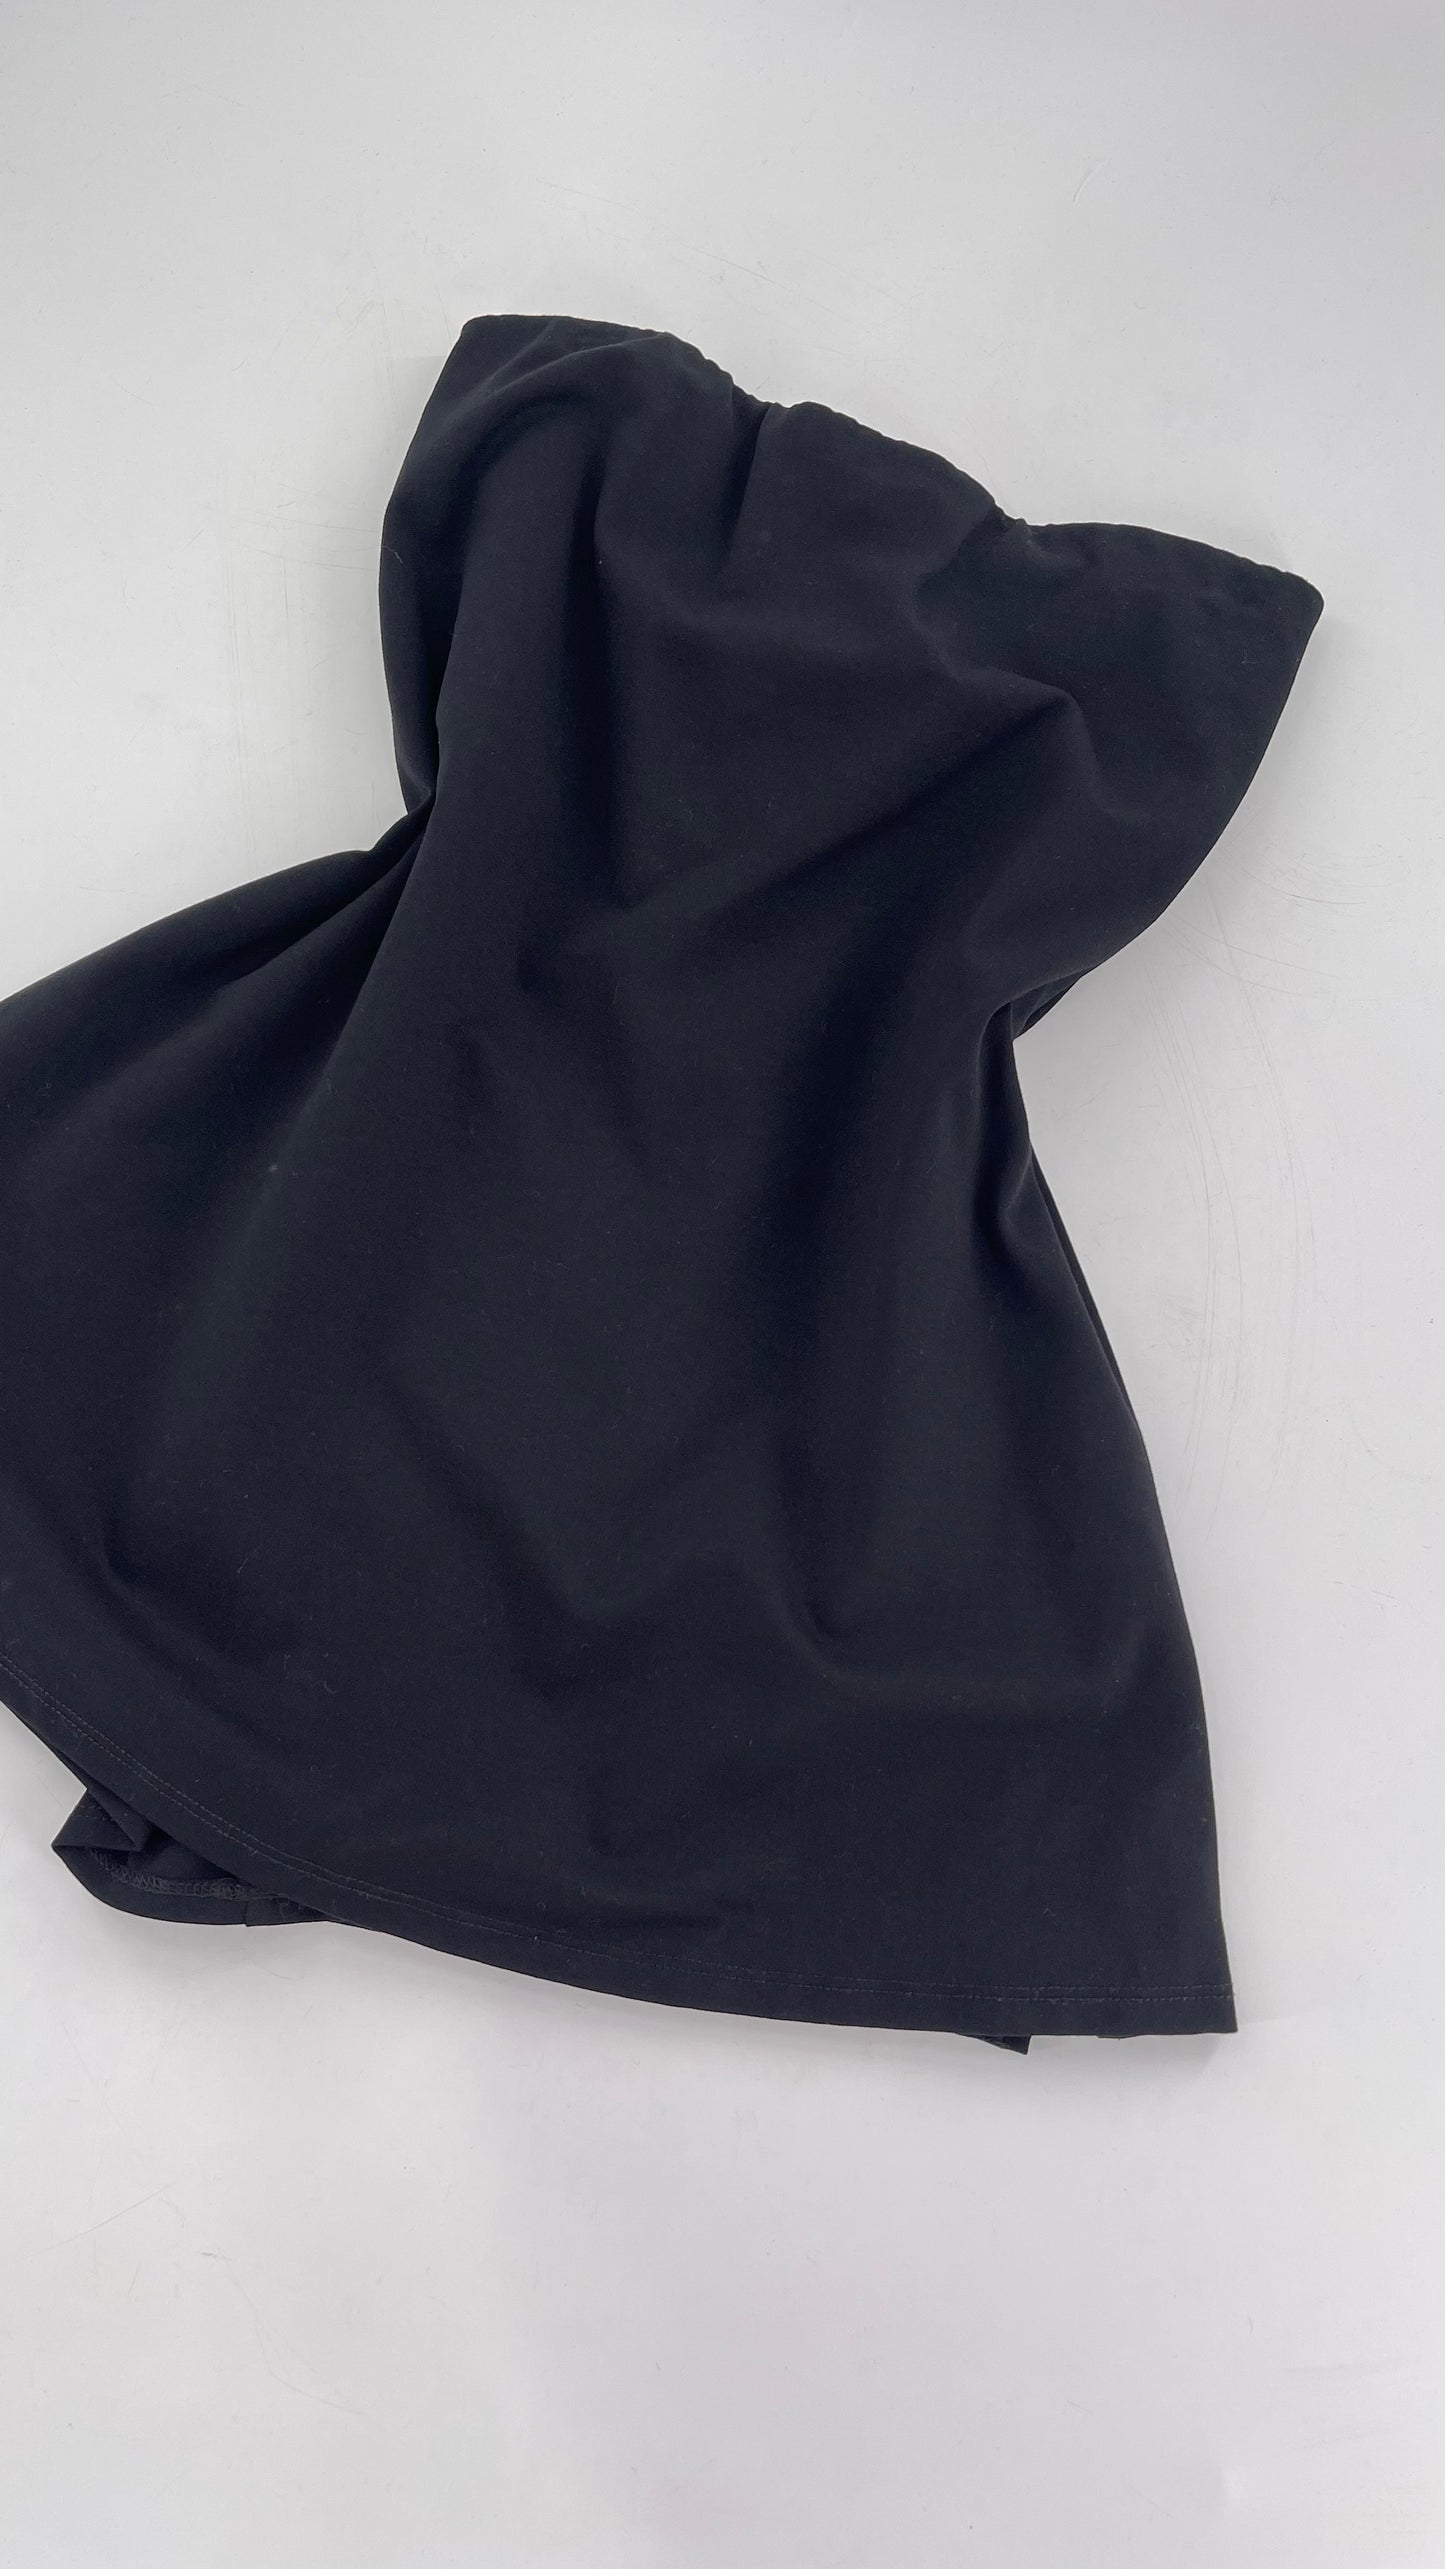 Urban Outfitters Black Tube Dress (Small)